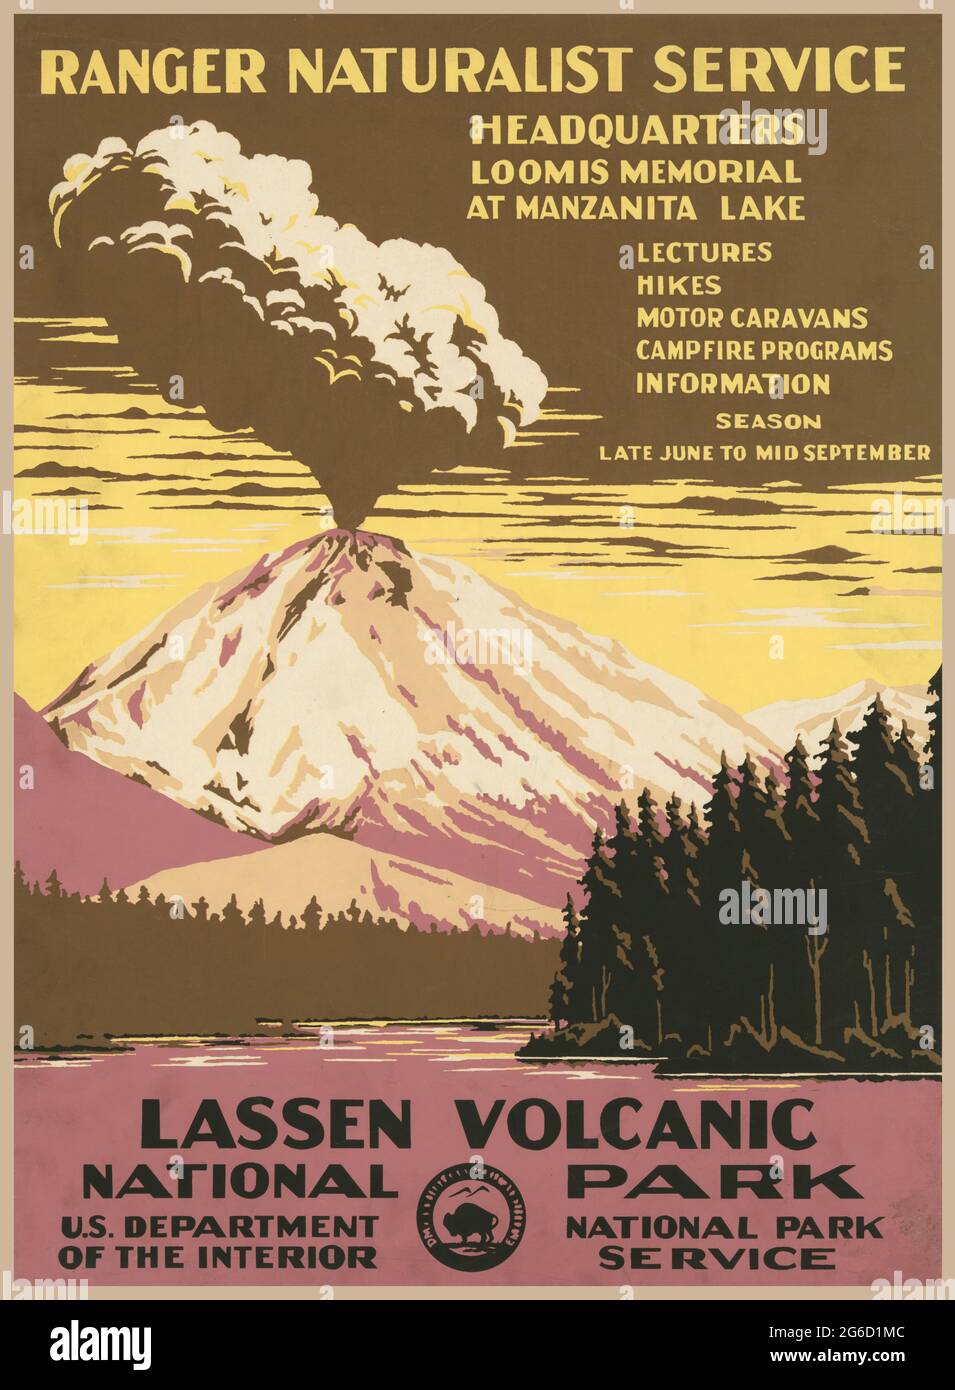 Lassen Volcanic National Park poster. A WPA Federal Art Project poster for the National Park Service promoting Lassen Volcanic National Park 1938. Stock Photo